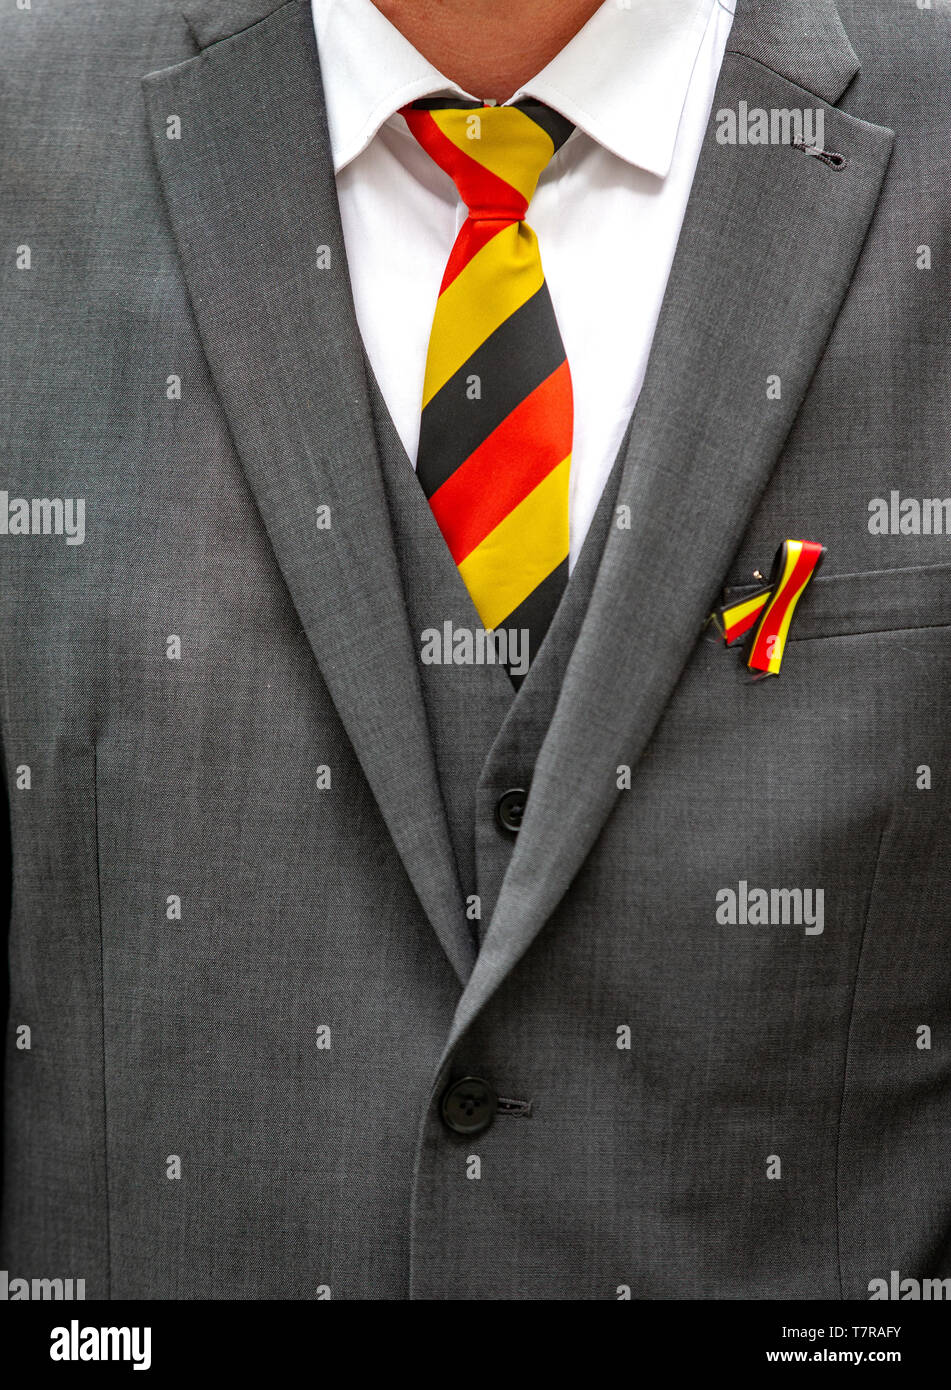 Infected Blood Inquiry. Details of the tie. Red represents HIV, The Yellow Hepatitis and the Black represents those who have passed away. Stock Photo